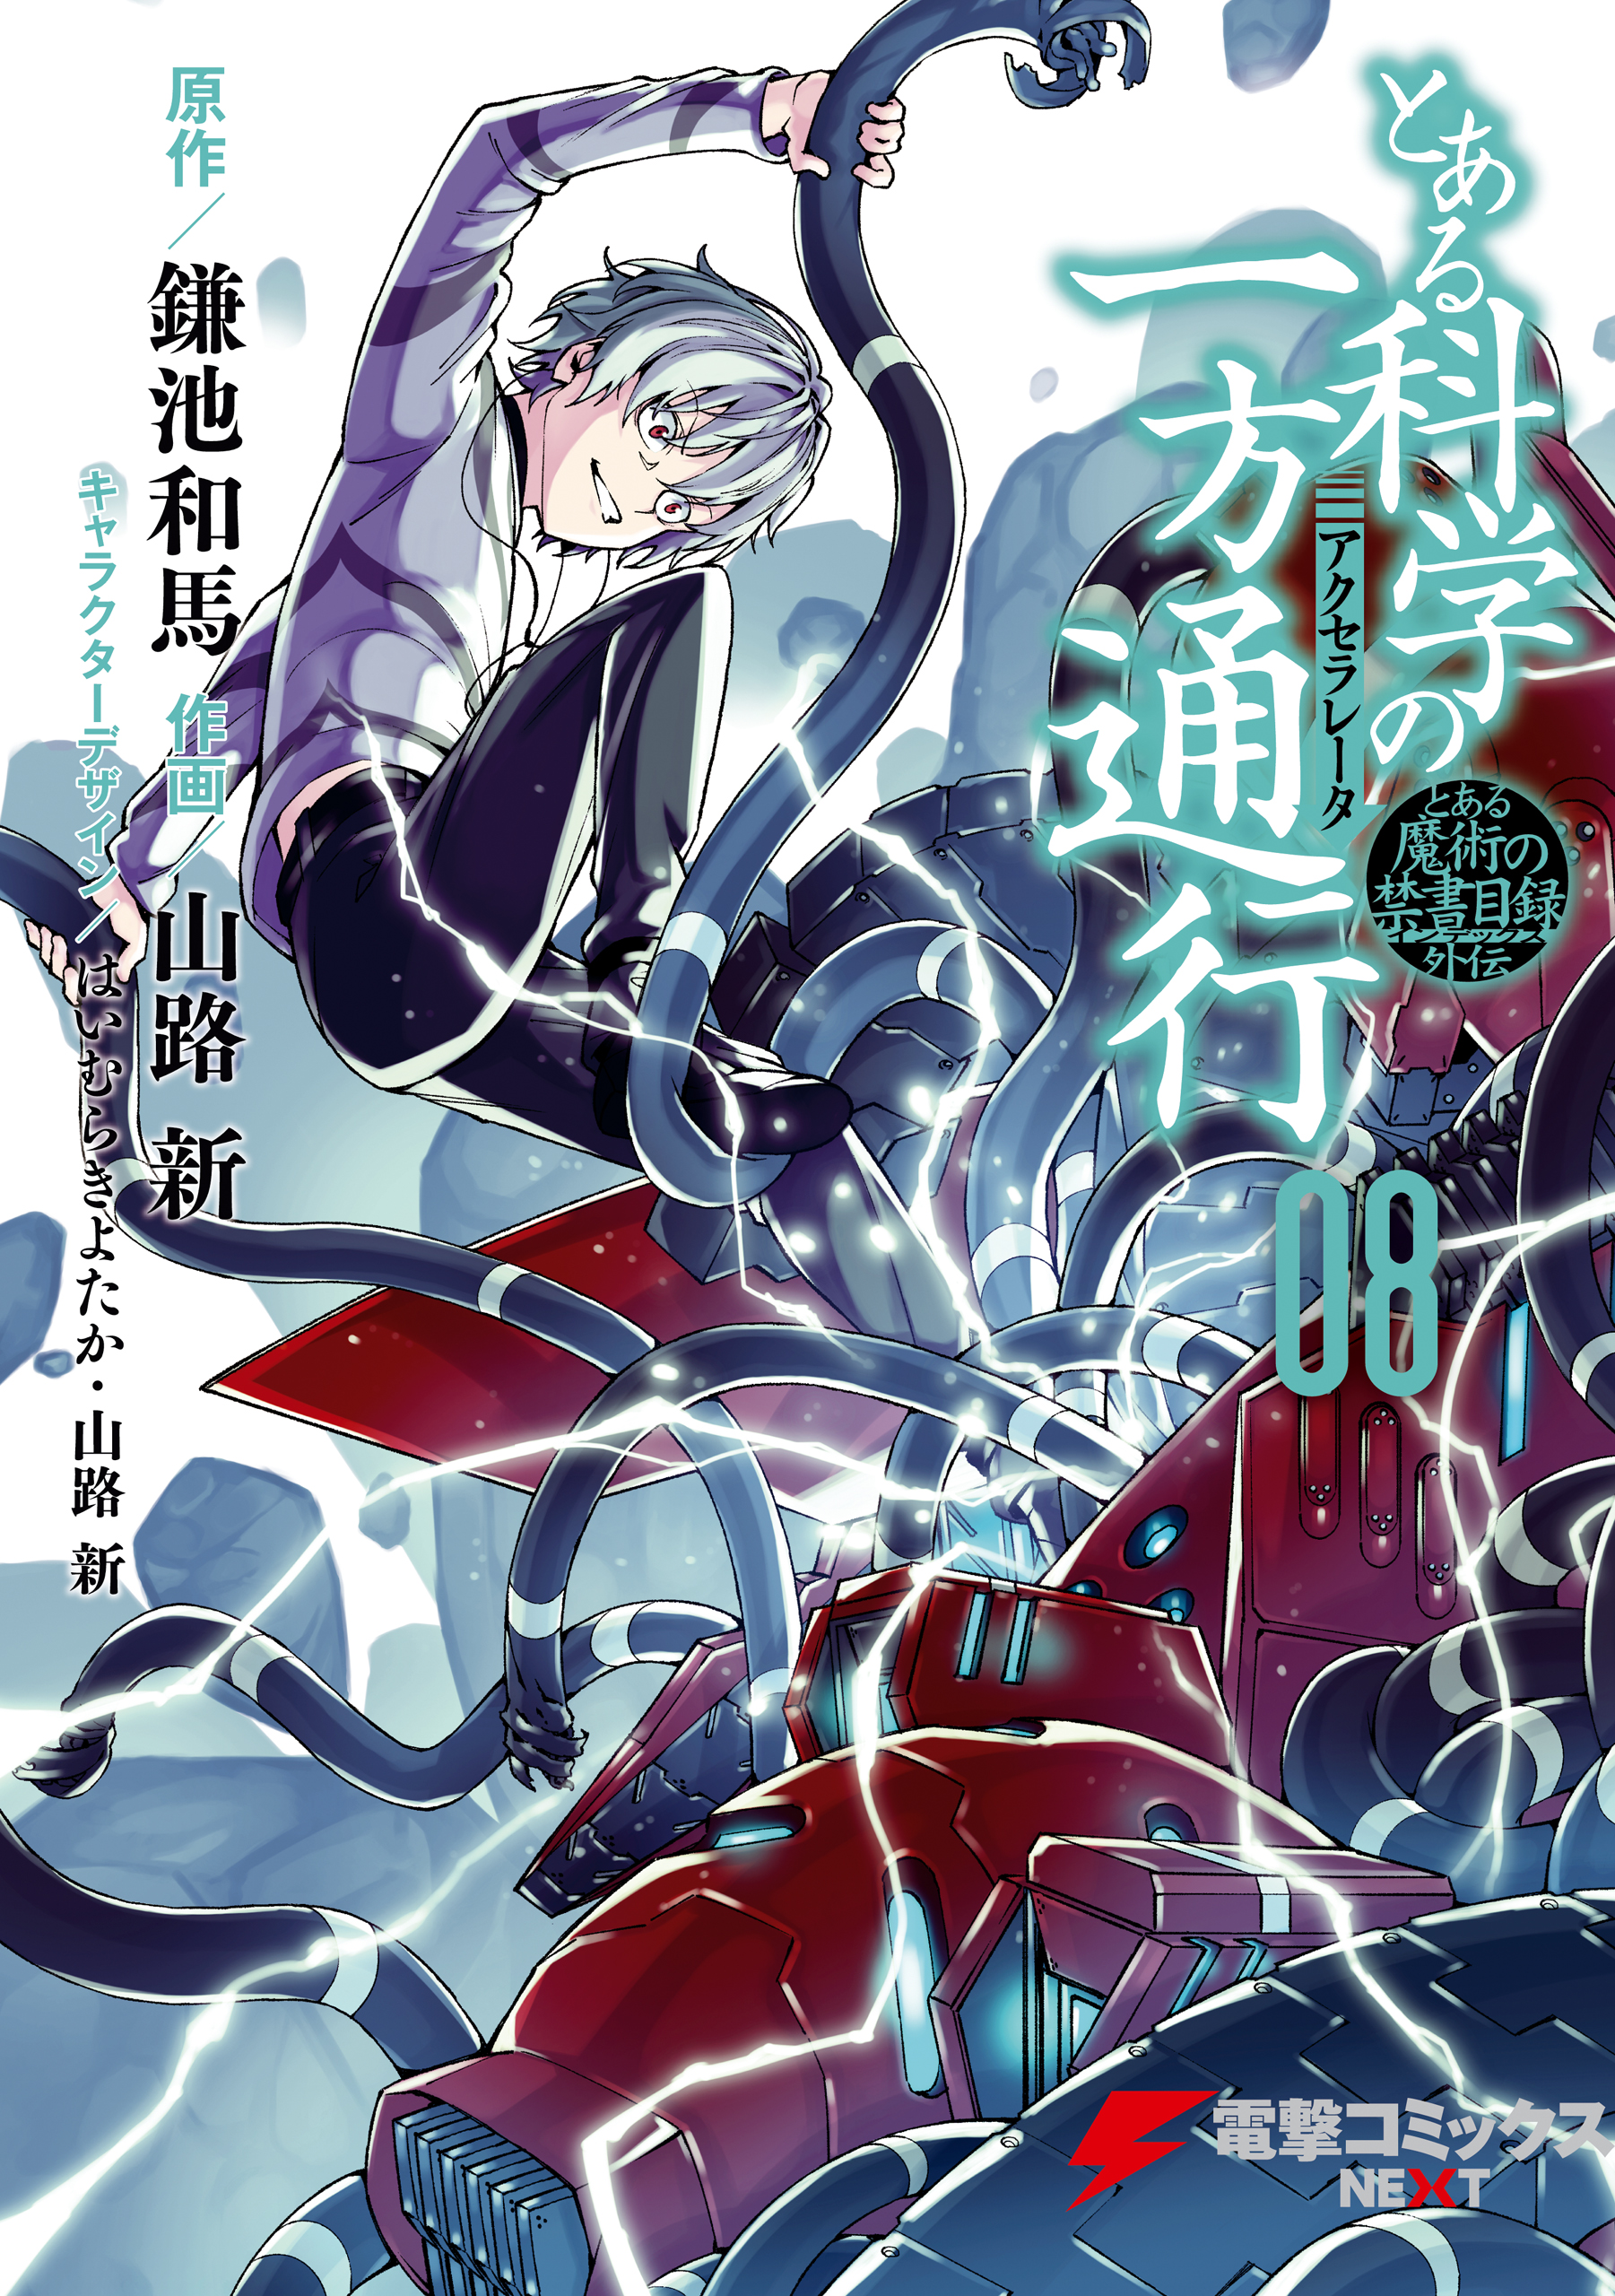 A Certain Scientific Accelerator Manga Ends in July - News - Anime News  Network